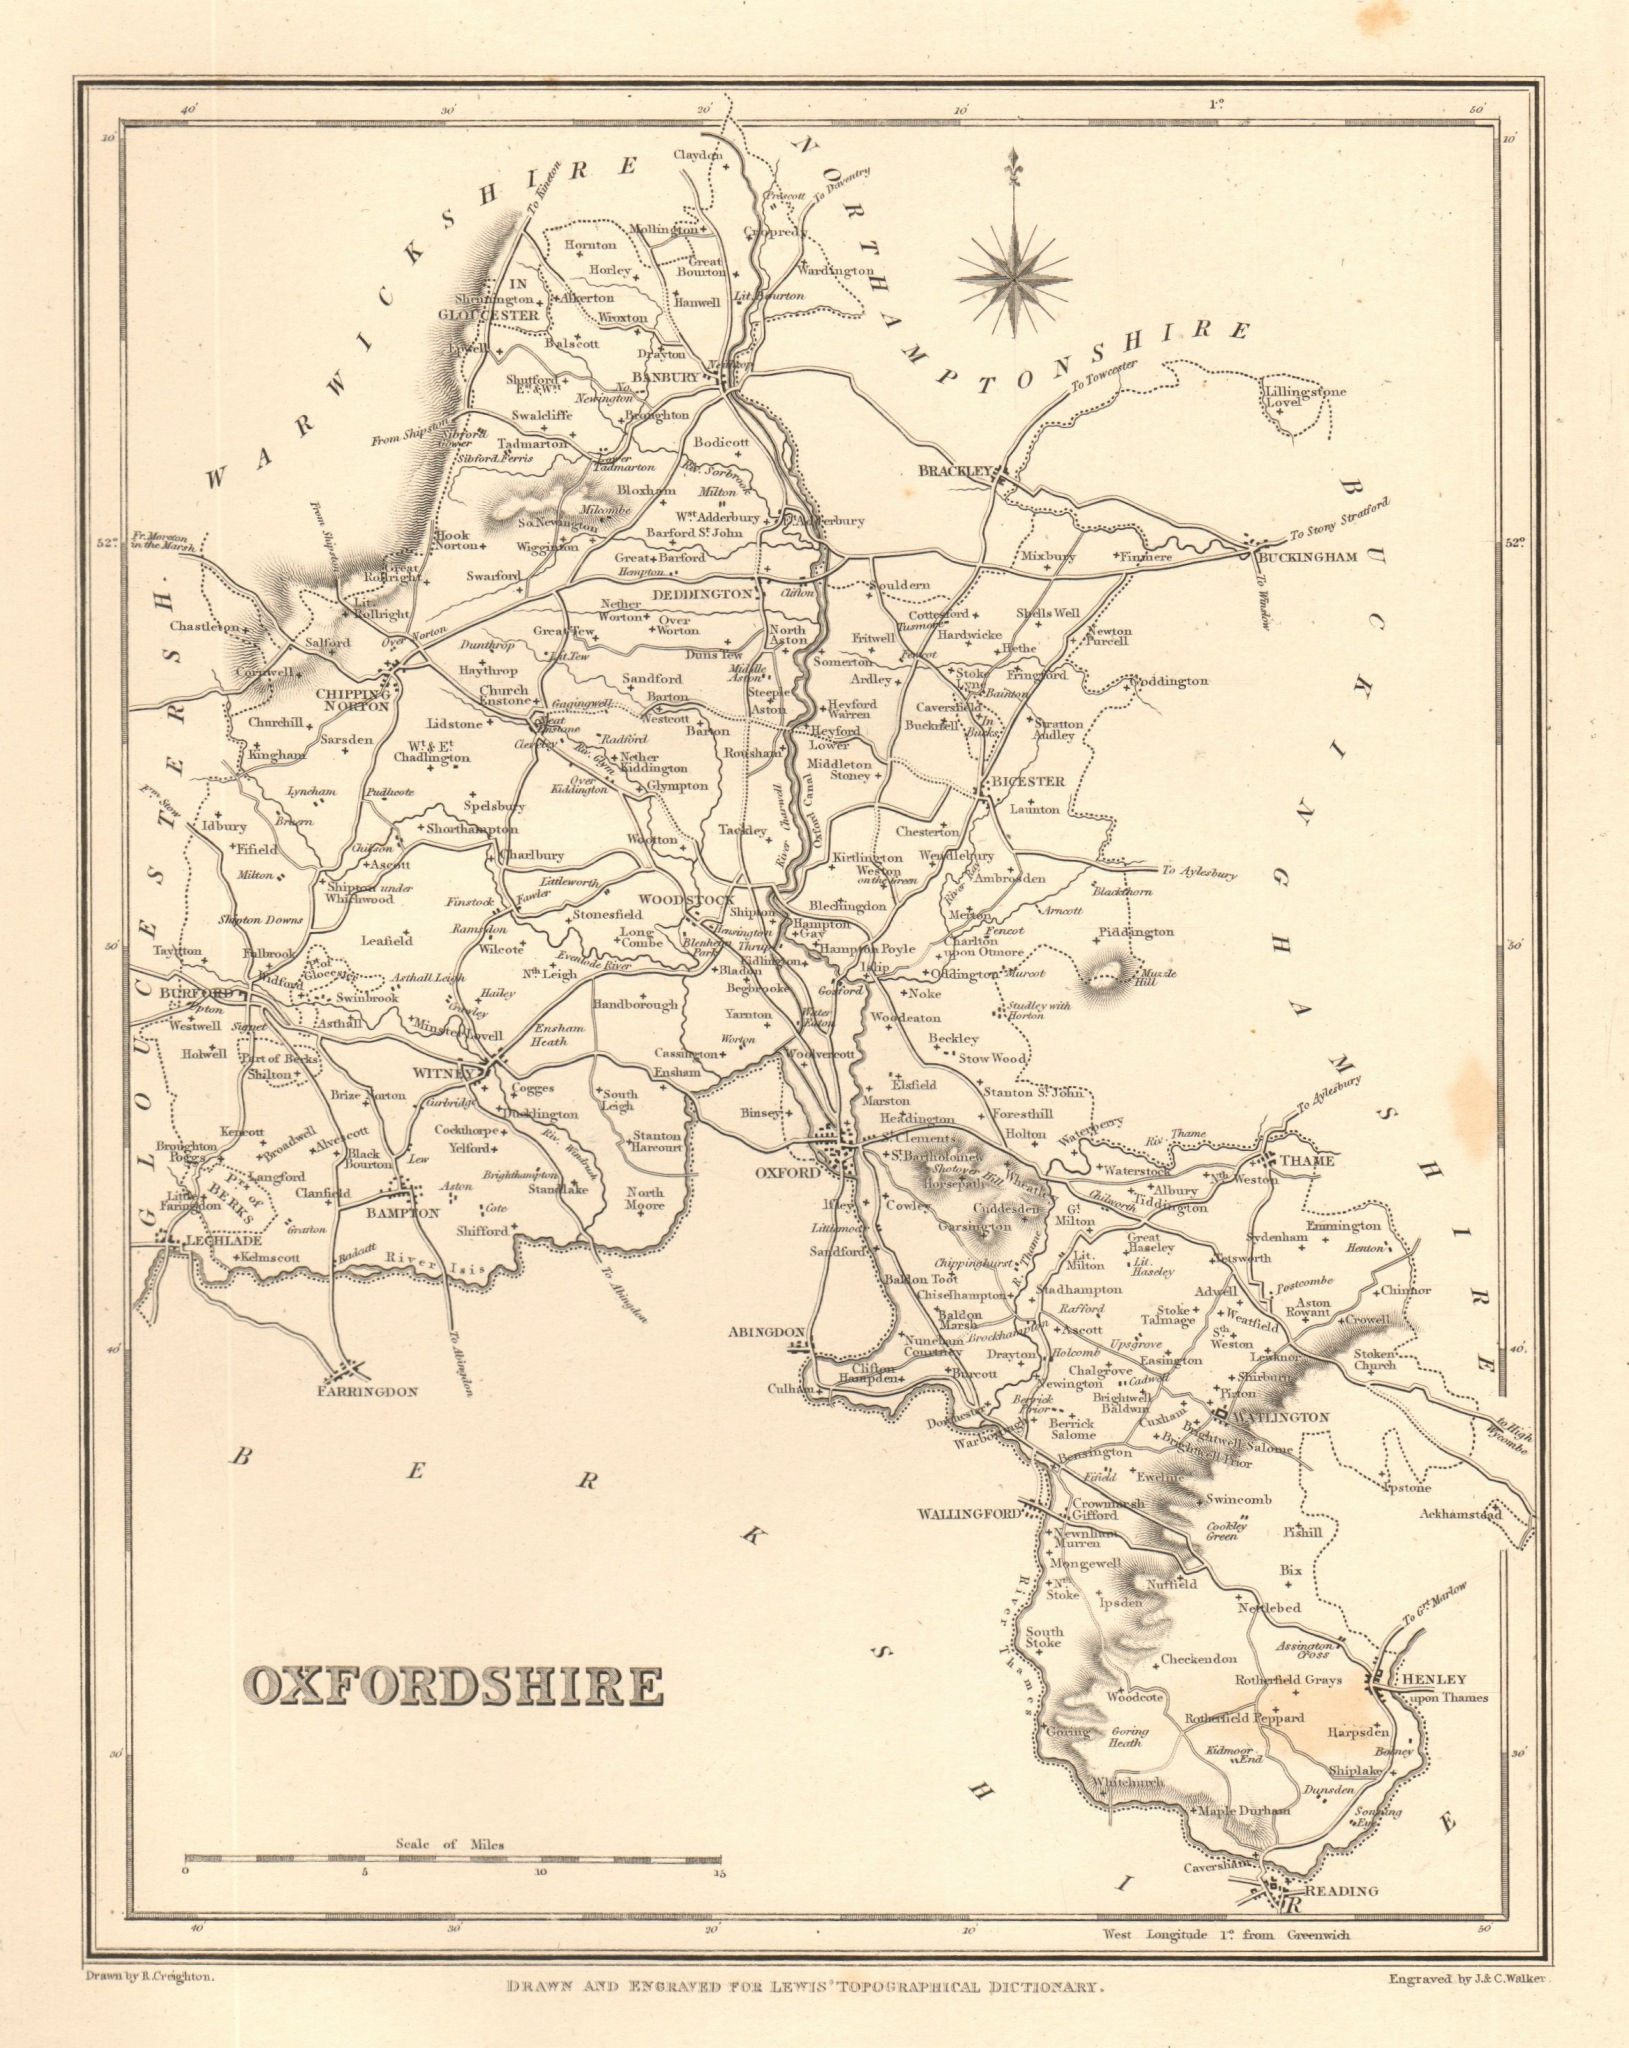 Antique county map of OXFORDSHIRE by Walker & Creighton for Lewis c1840